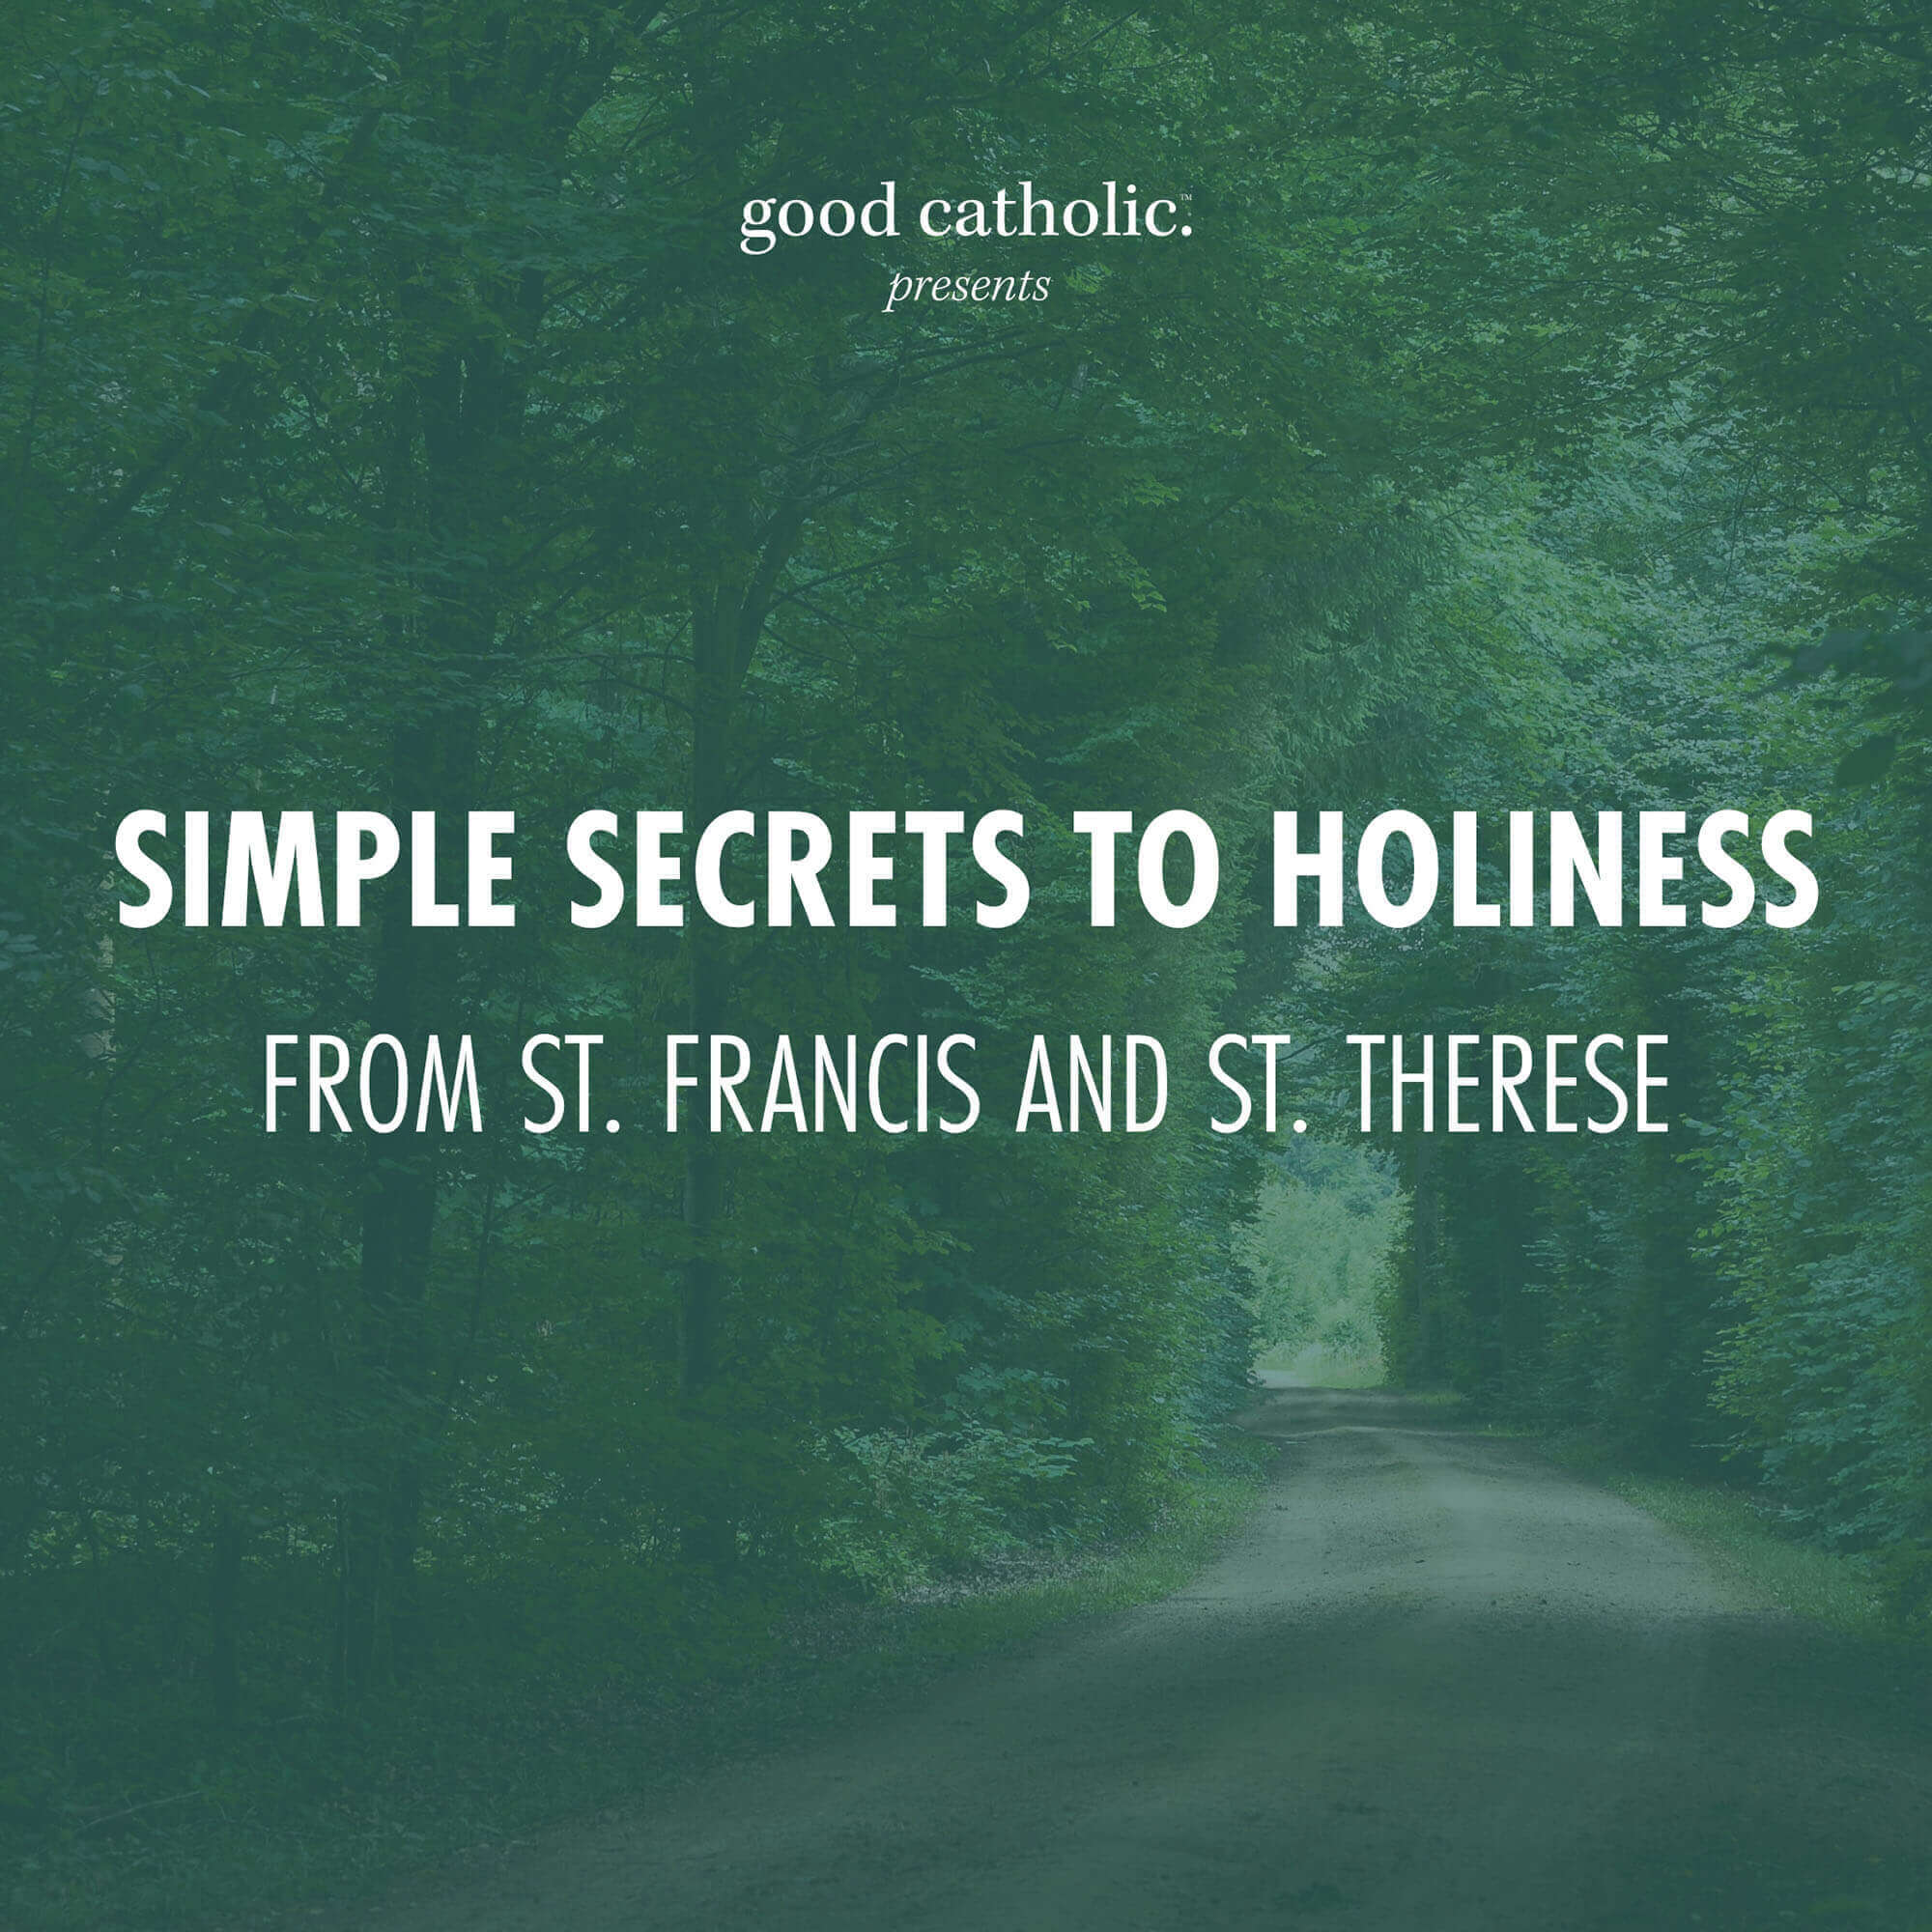 Simple Secrets to Holiness from St. Francis and St. Thérèse